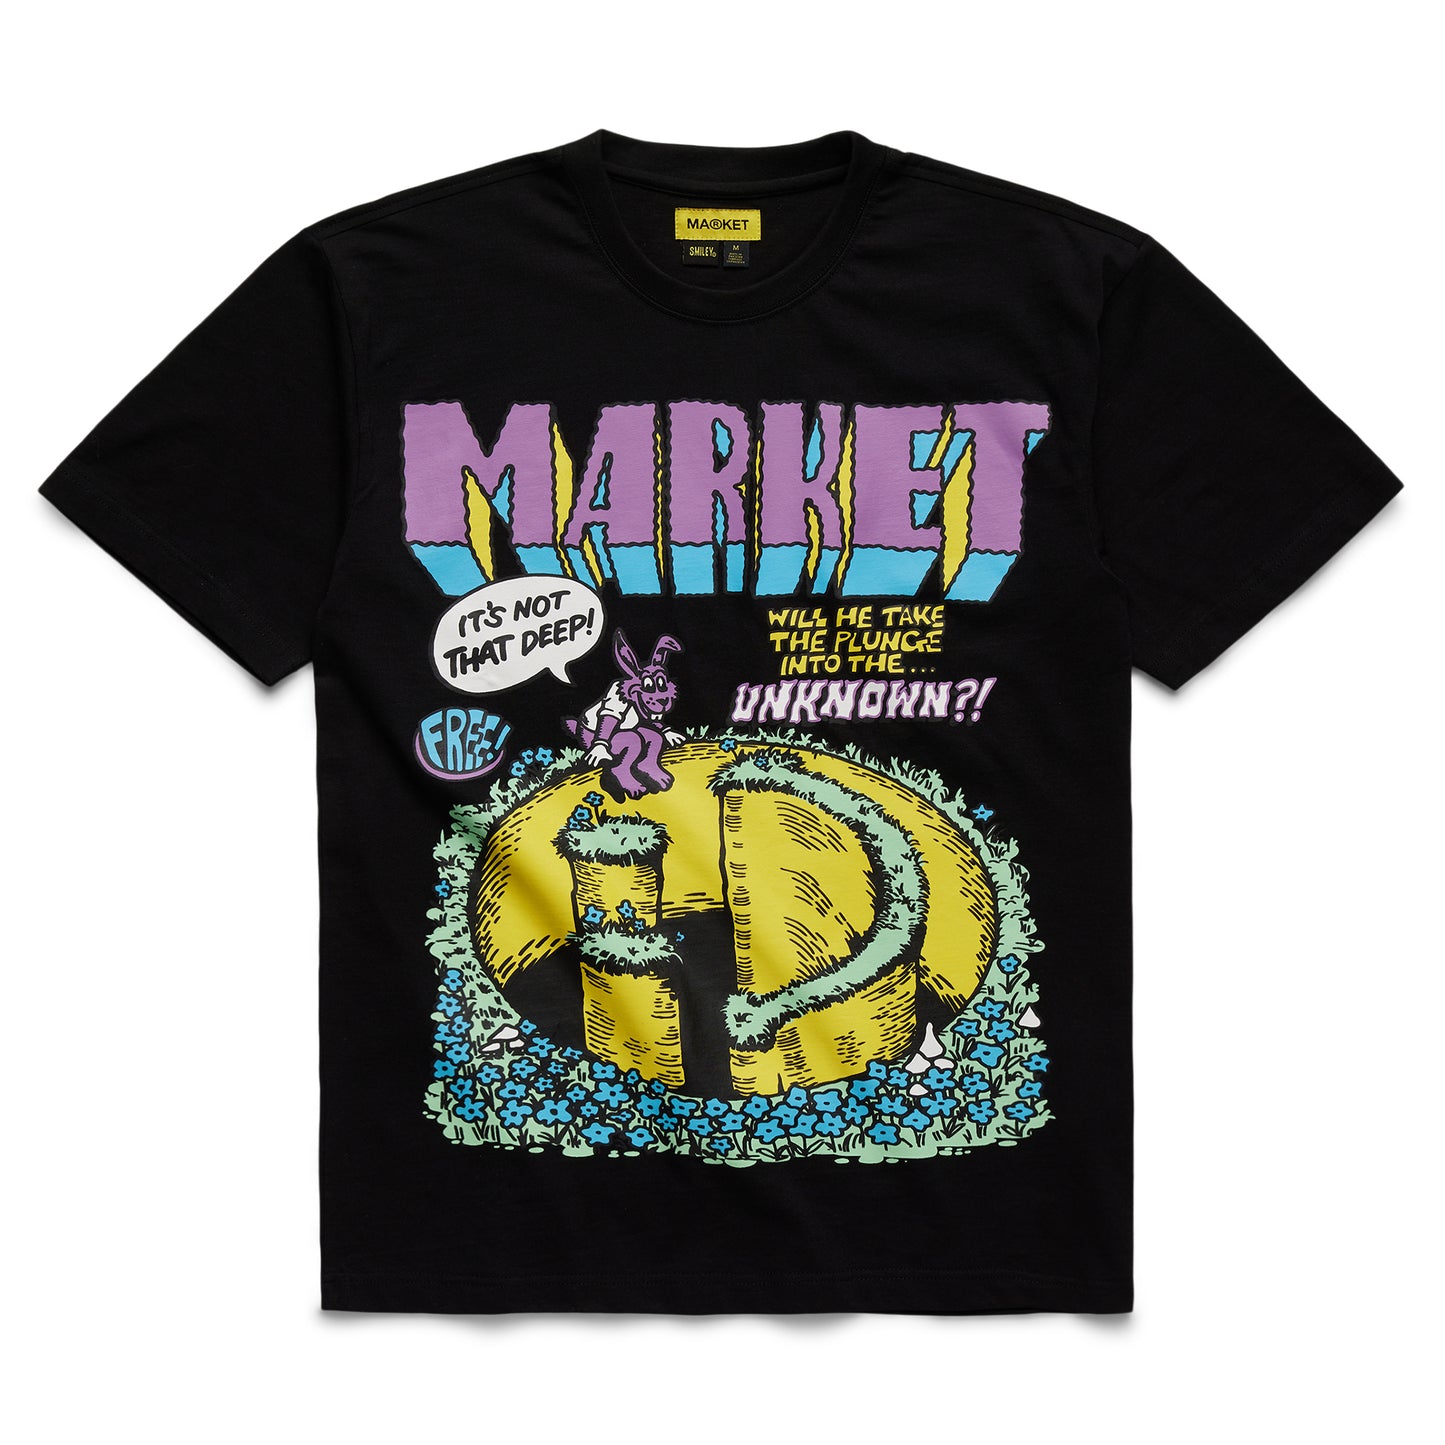 MARKET SMILEY INTO THE UNKNOWN T-SHIRT - deviceone